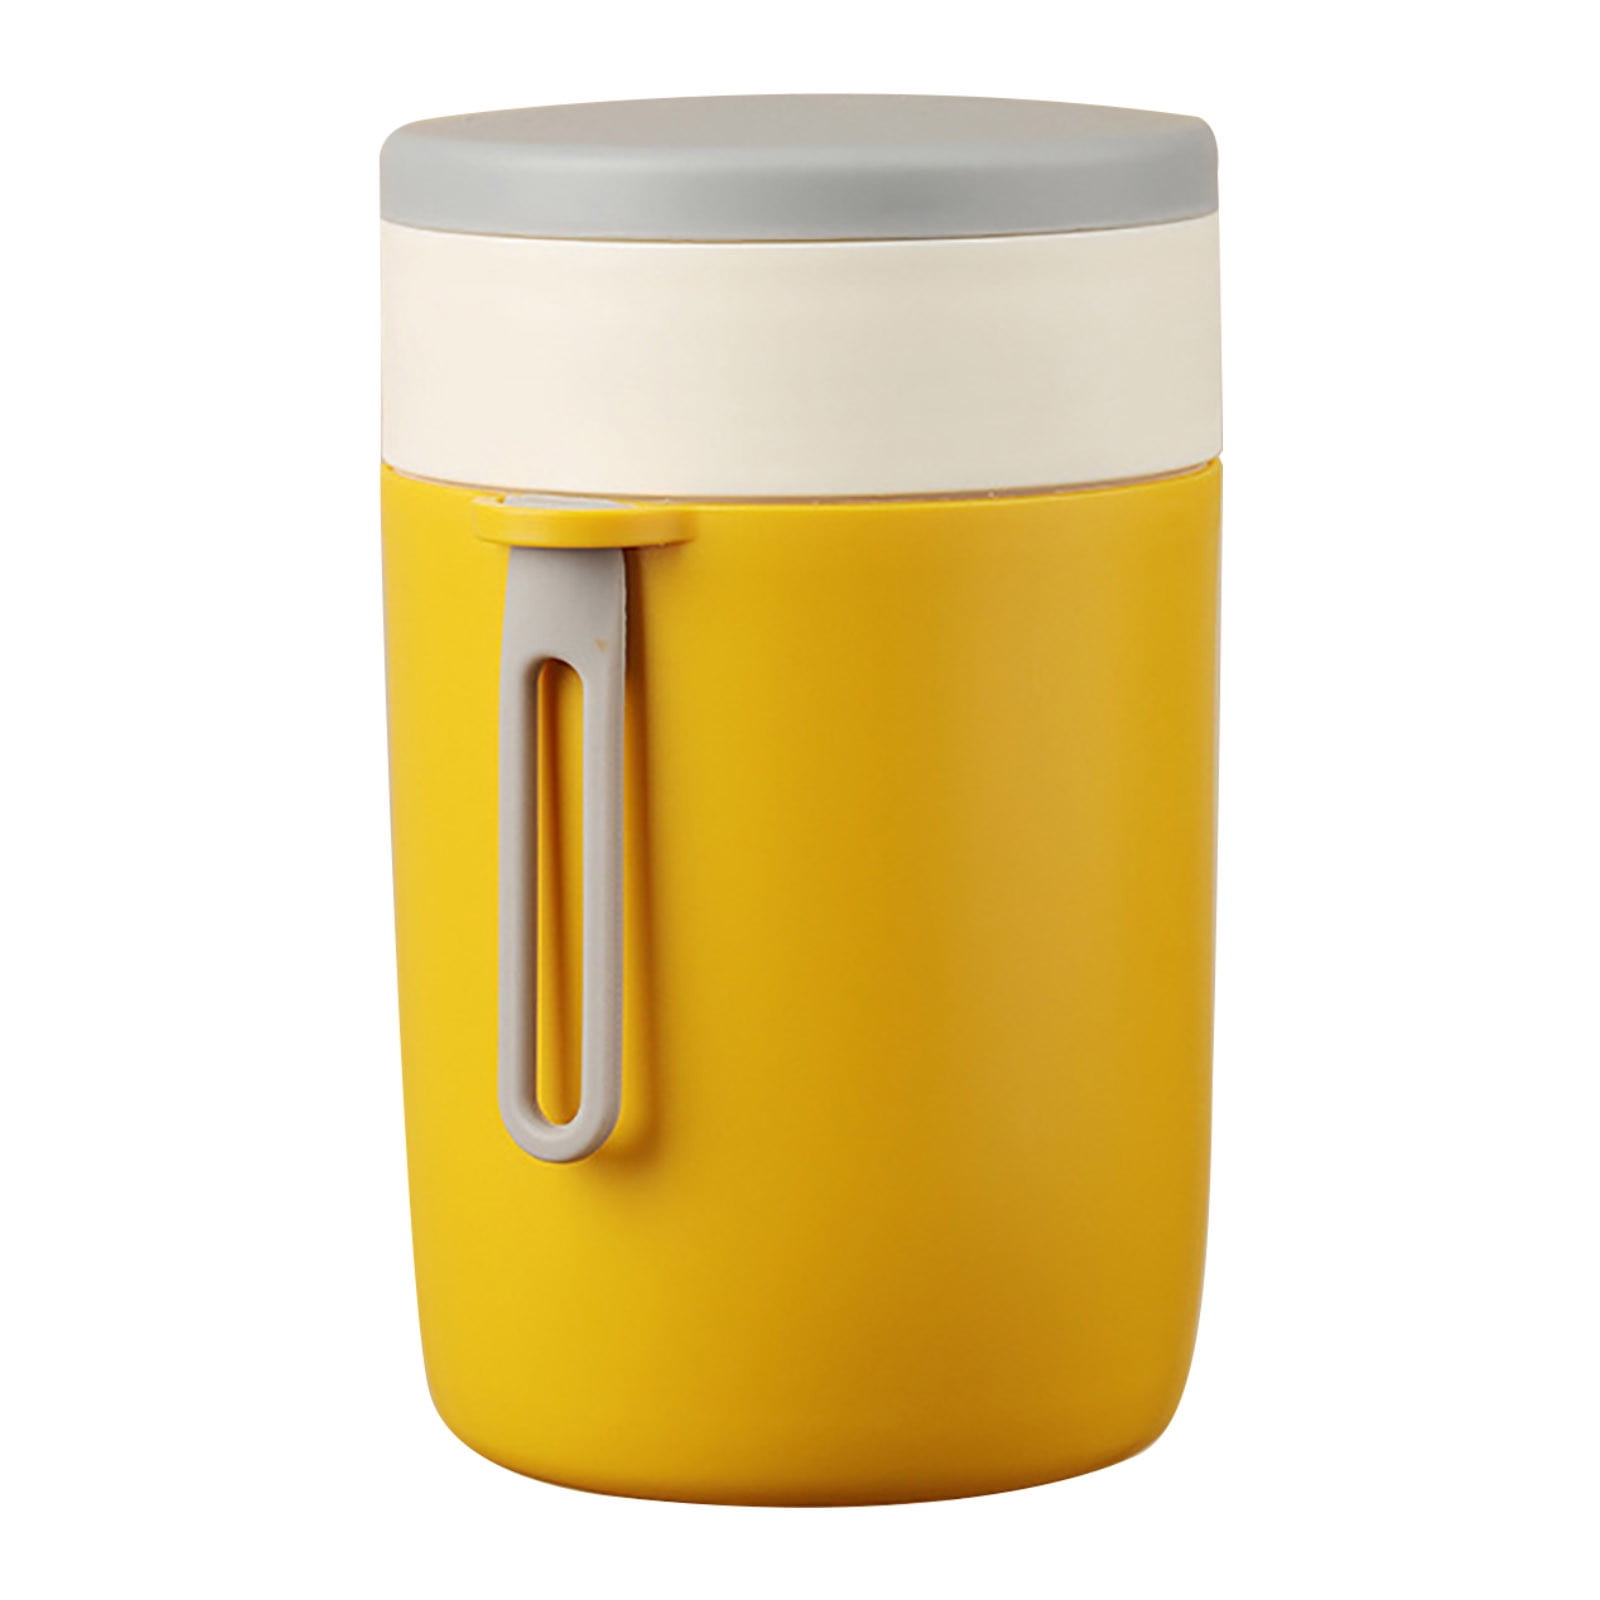 Jikolililili Insulated Container for Hot Food - Wide Mouth Hot